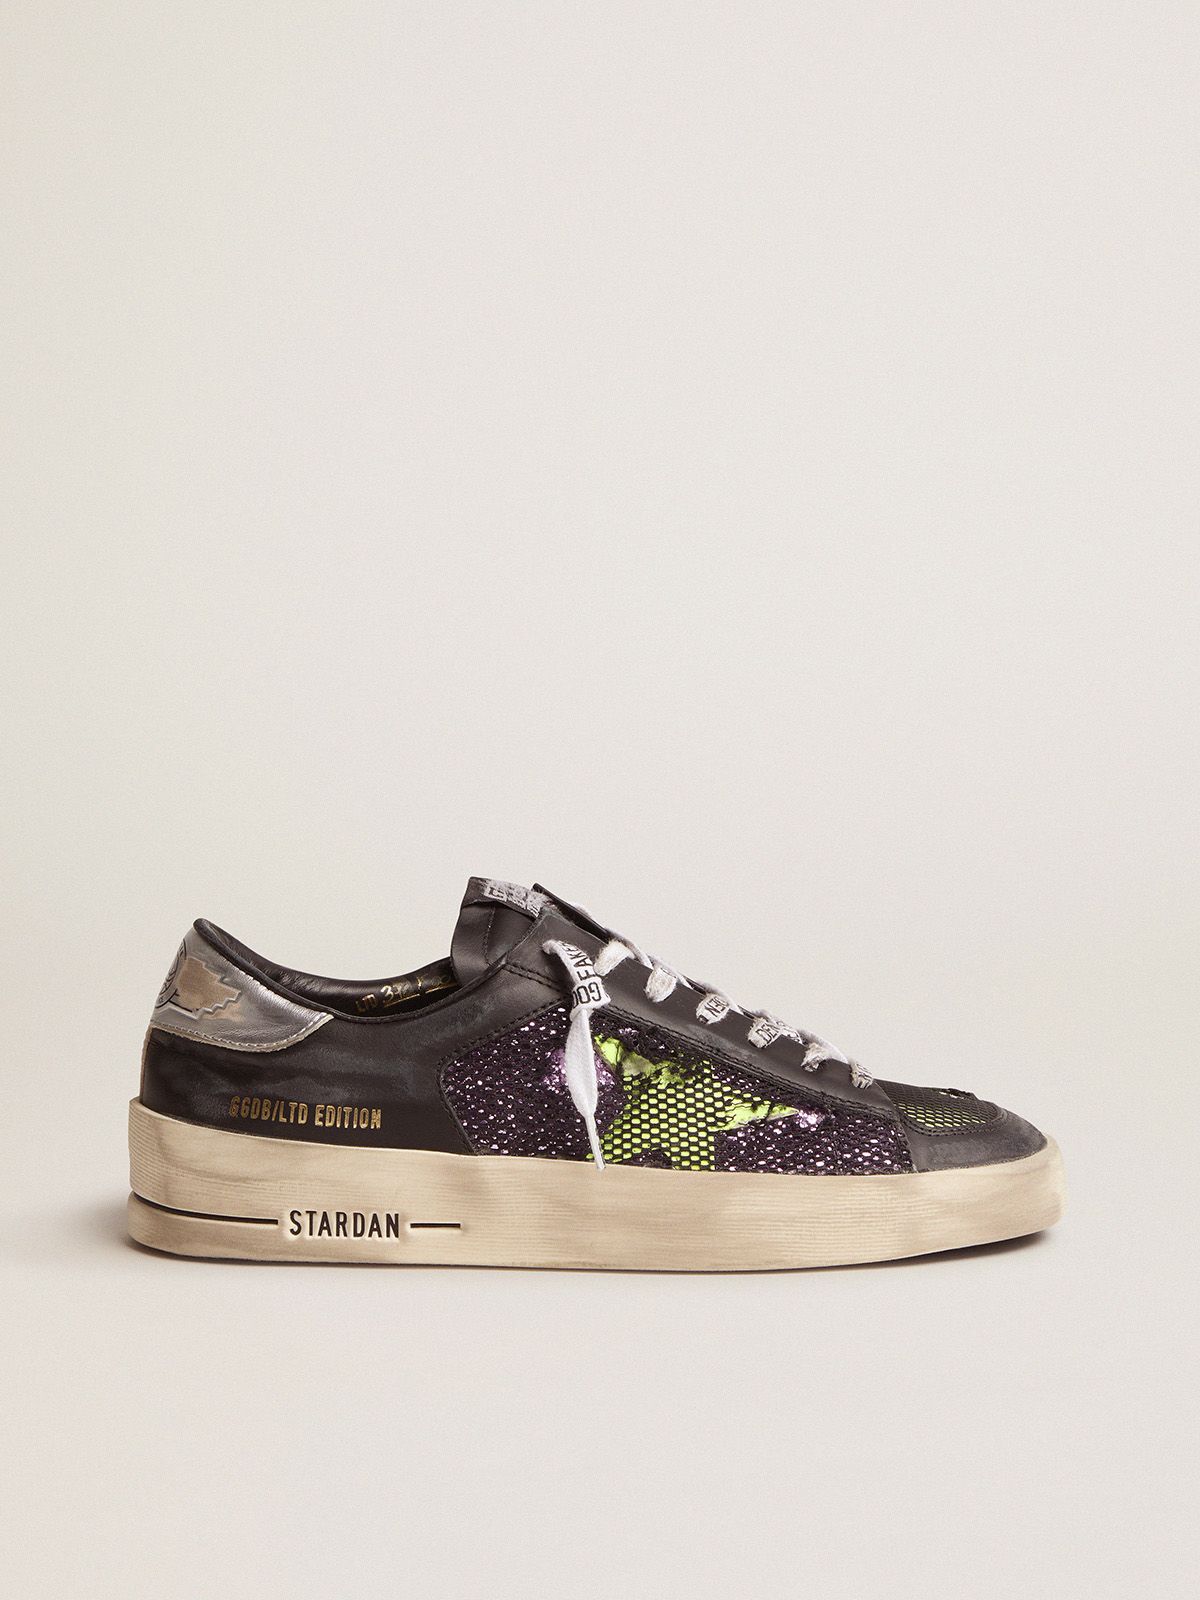 Golden Goose Saldi Uomo Women’s LAB Limited Edition Stardan sneakers with glitter and fluorescent yellow details